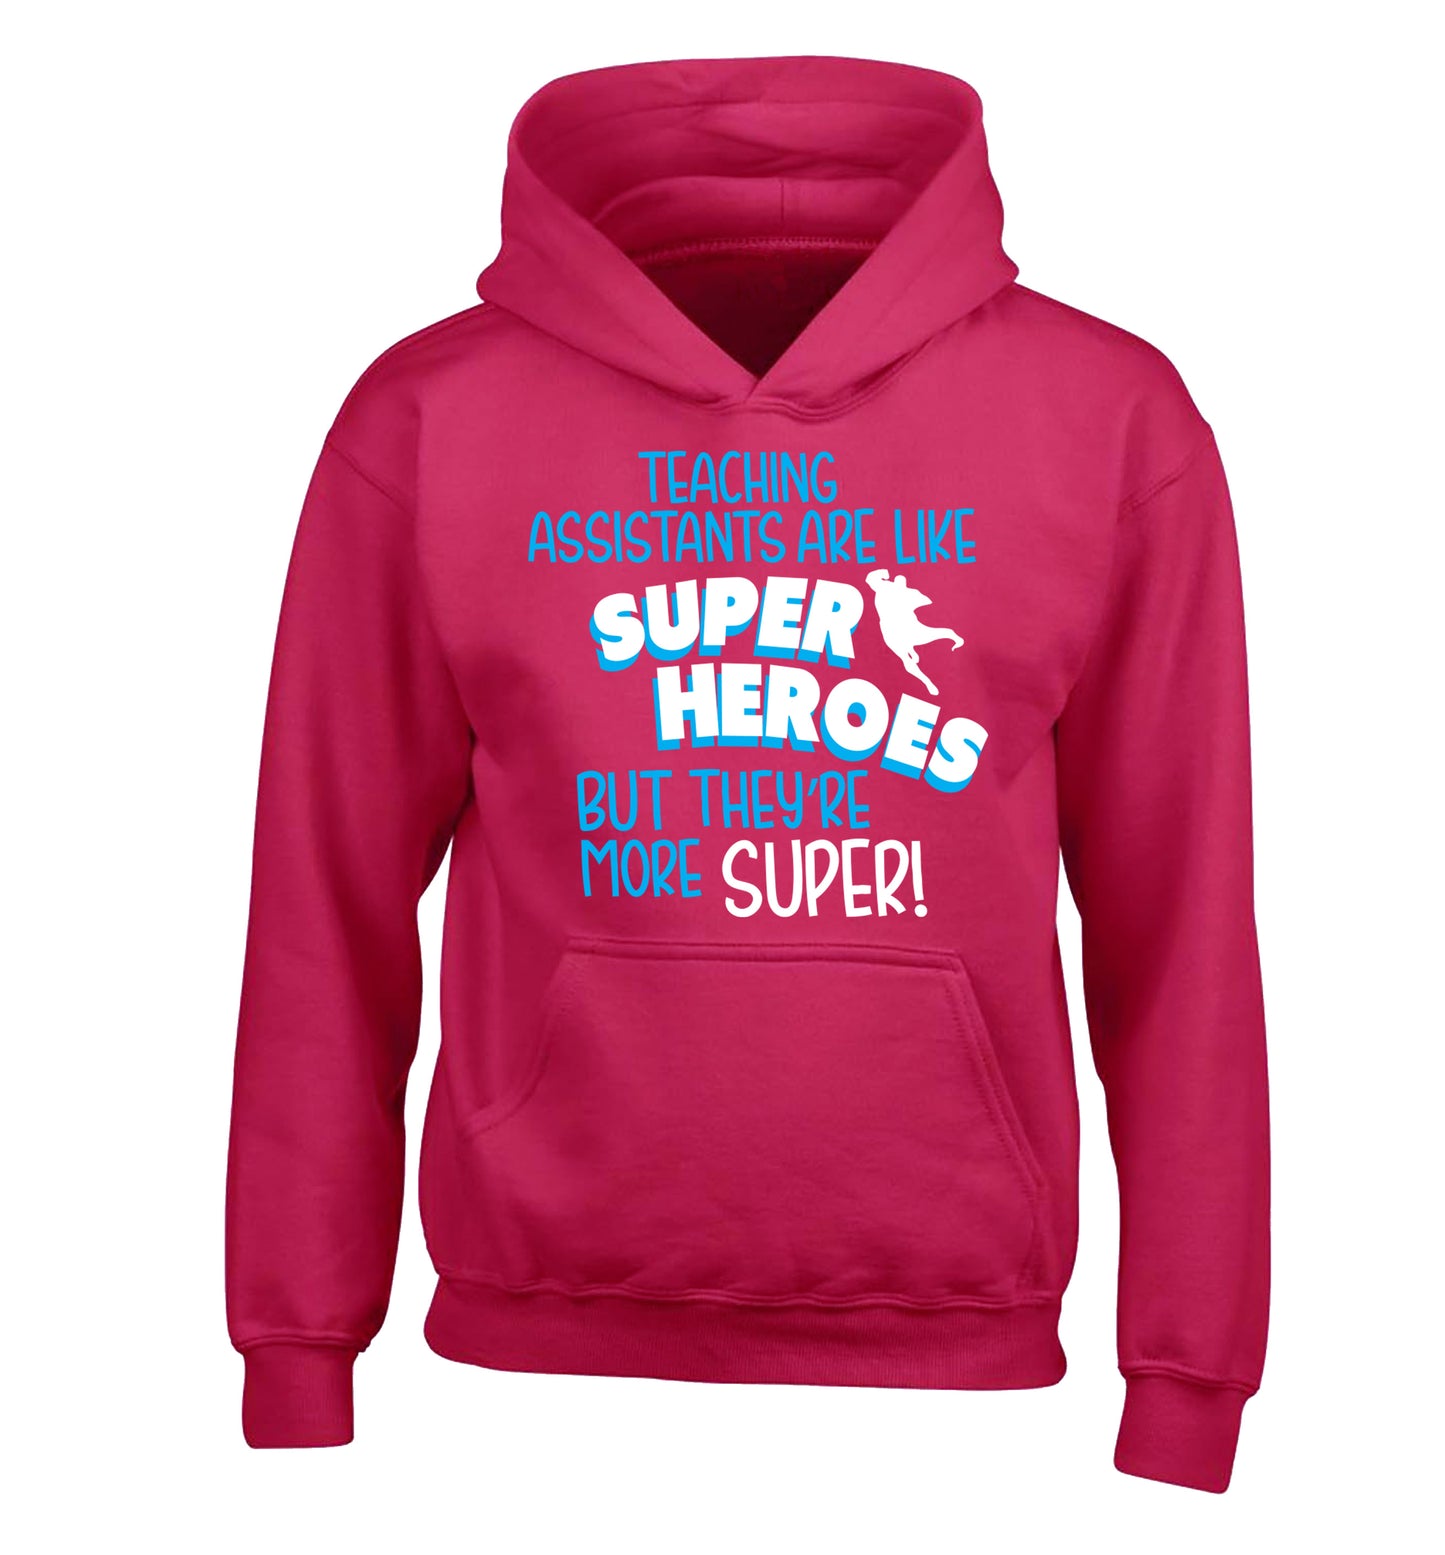 Teaching assistants are like superheros but they're more super children's pink hoodie 12-13 Years